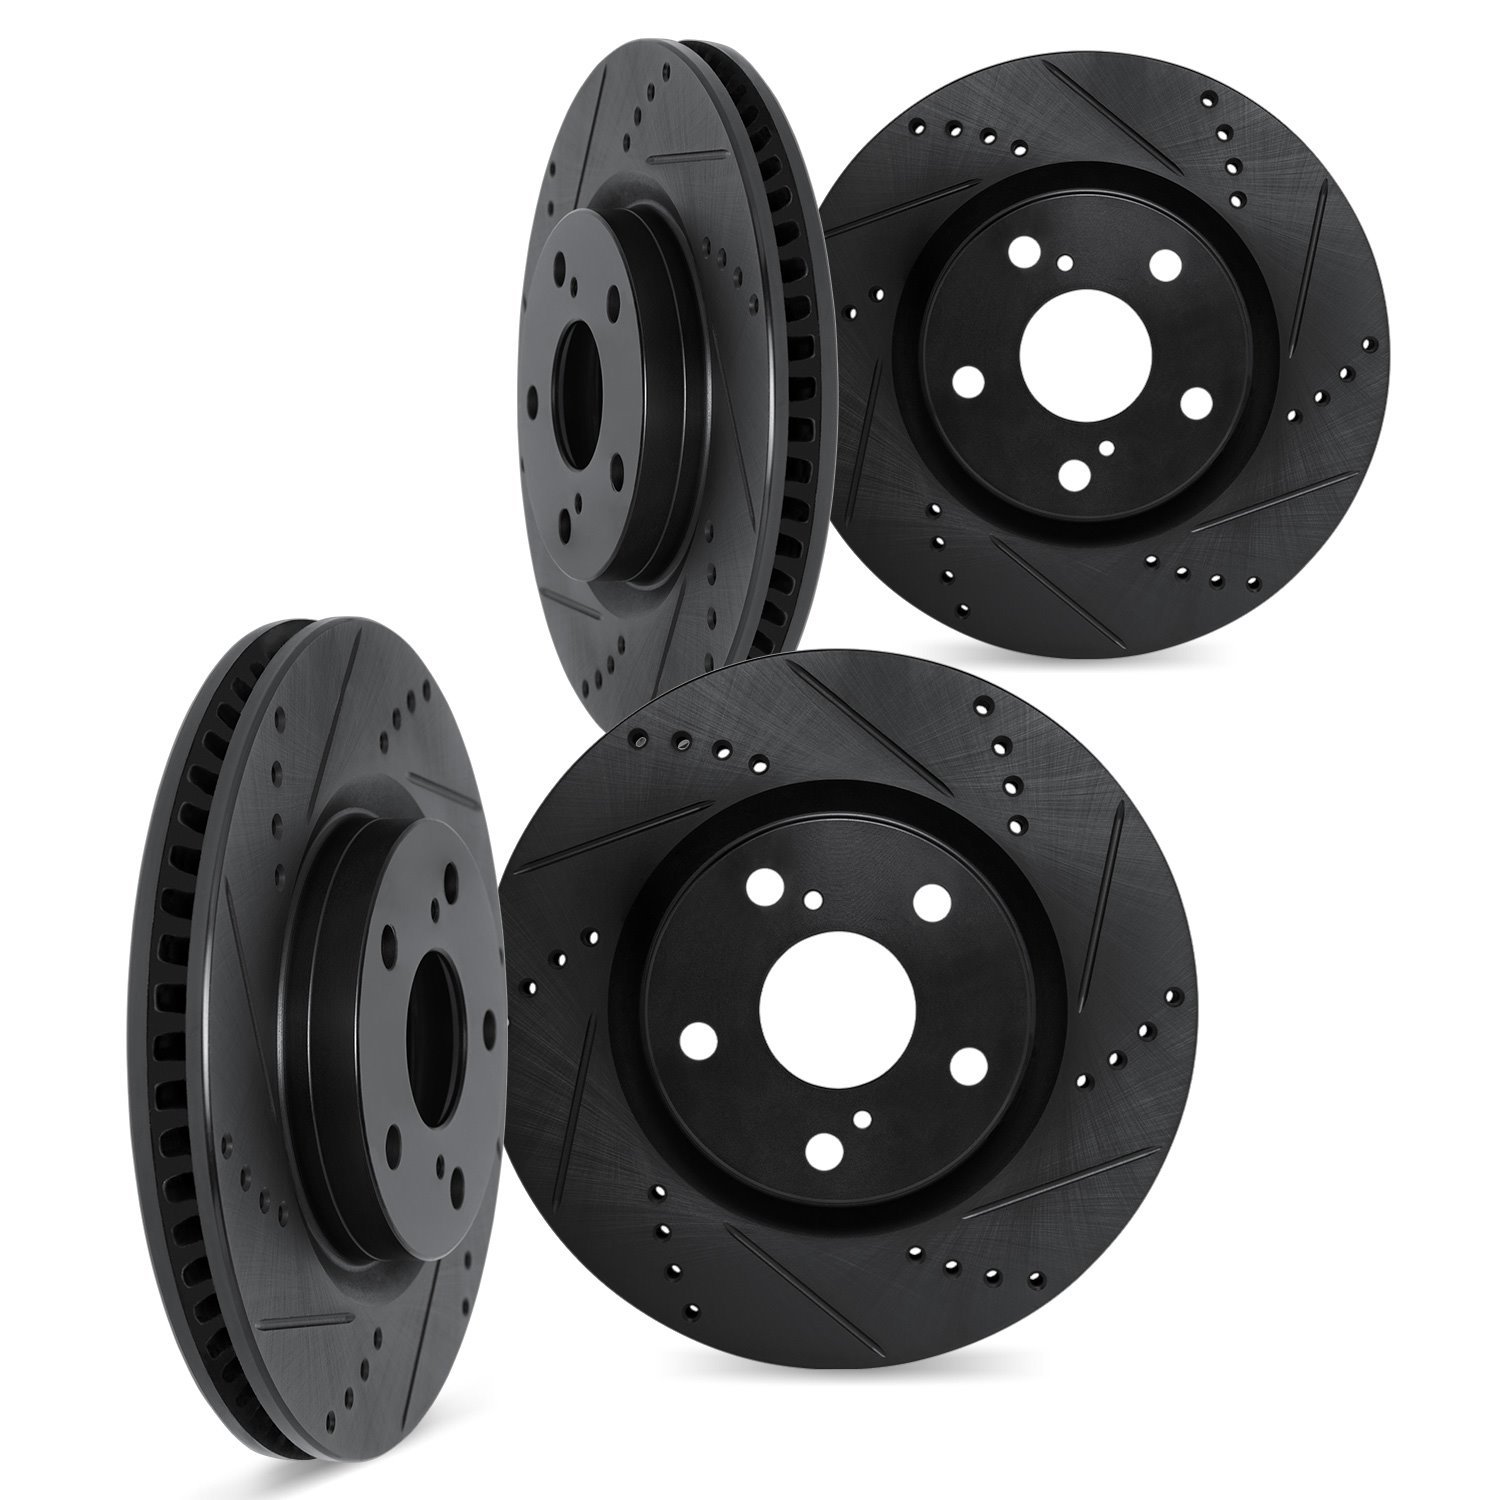 8004-75018 Drilled/Slotted Brake Rotors [Black], Fits Select Lexus/Toyota/Scion, Position: Front and Rear